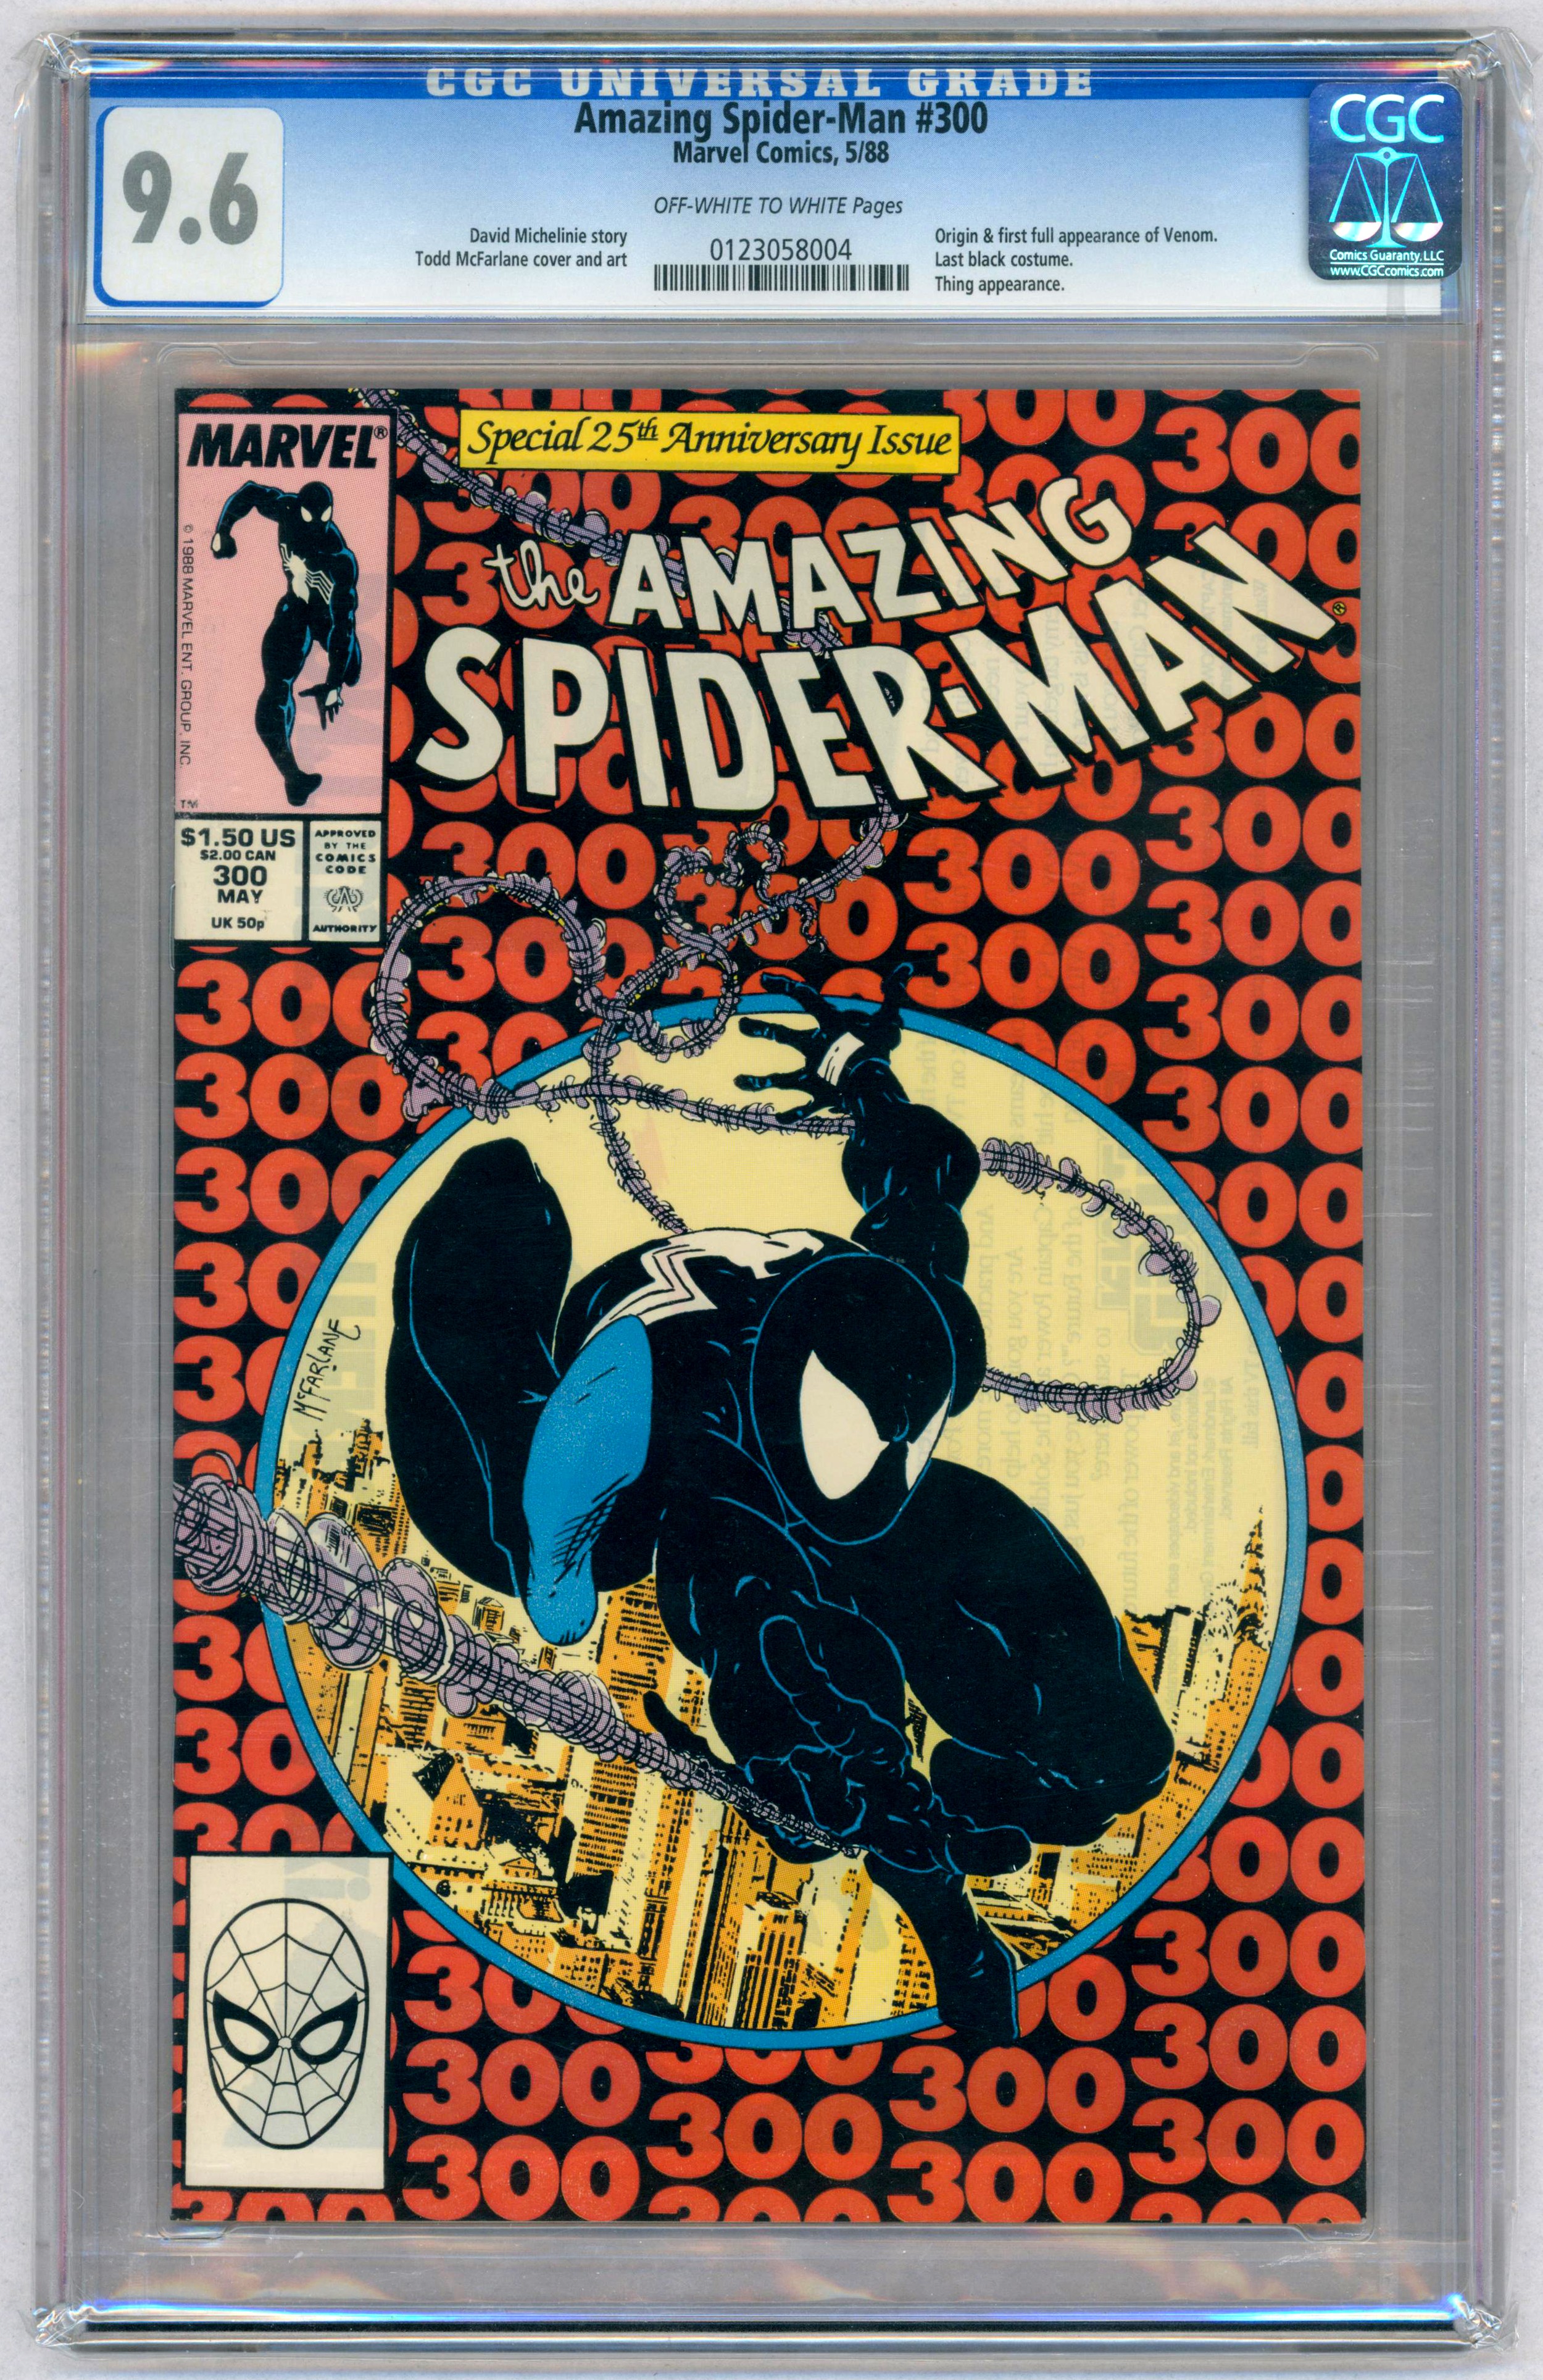 AMAZING SPIDER-MAN #300 – (1988 Marvel) – GRADED 9.6 by CGC – Key issue Origin & First appearance of